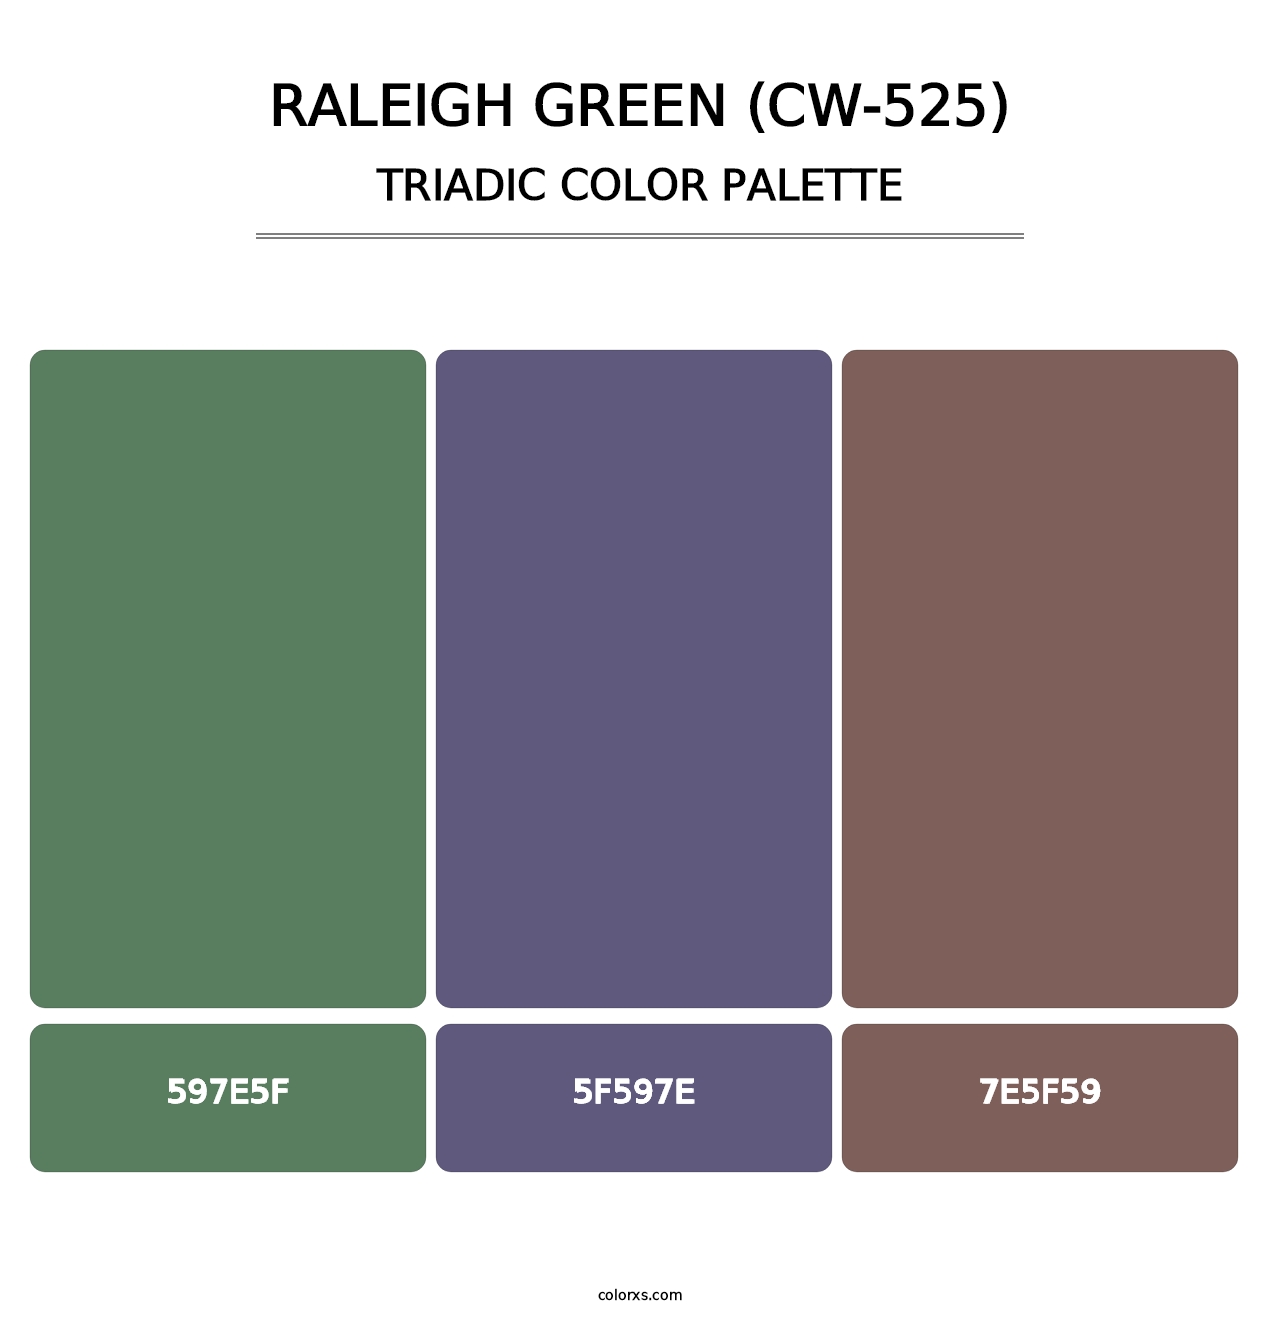 Raleigh Green (CW-525) - Triadic Color Palette